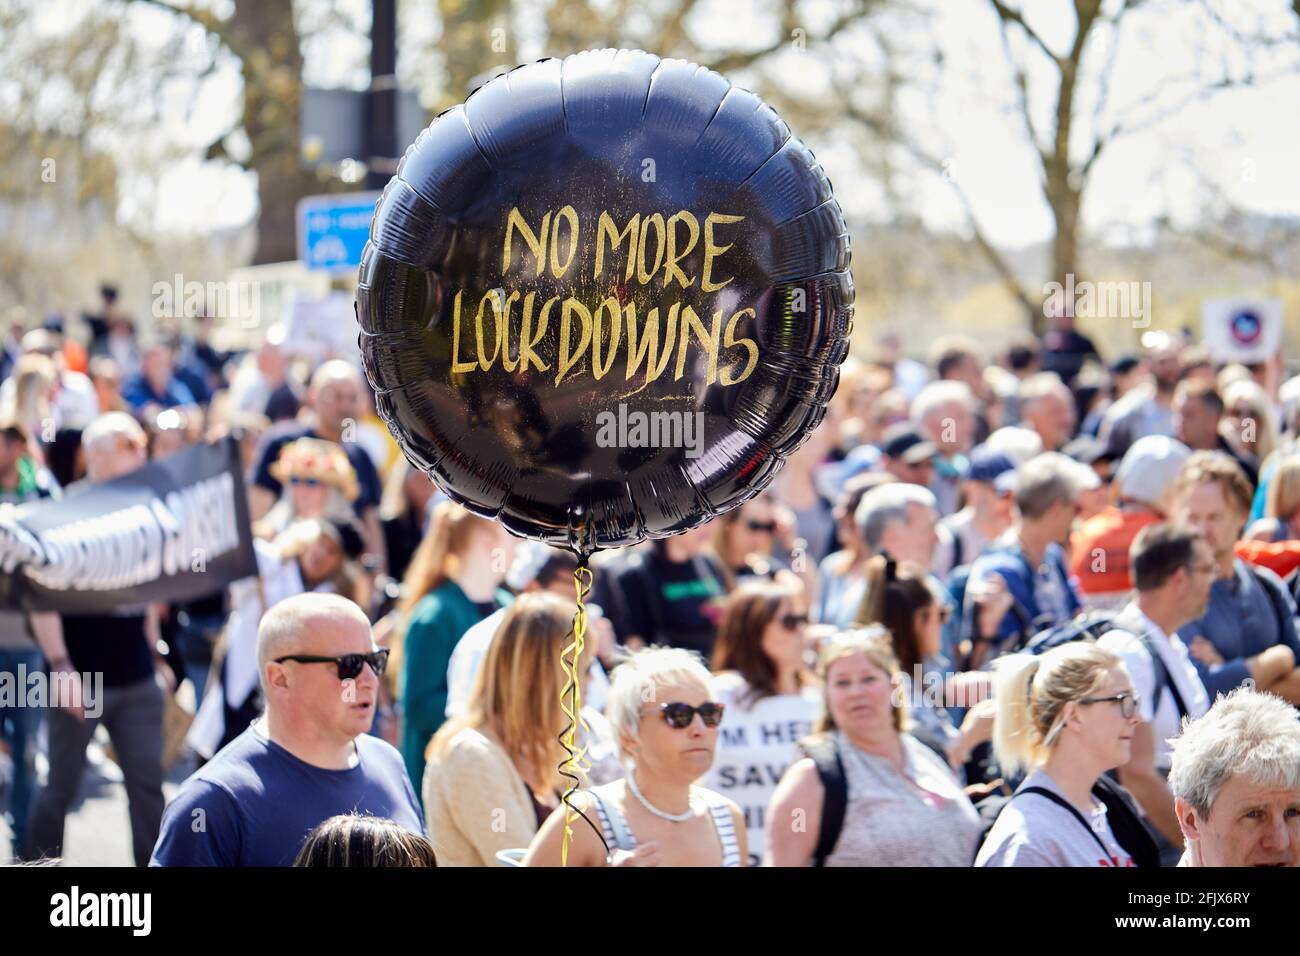 London, UK - 24 Apr 2021: Thousands of people marched in central London calling for a lifting of all coronavirus restrictions. Stock Photo